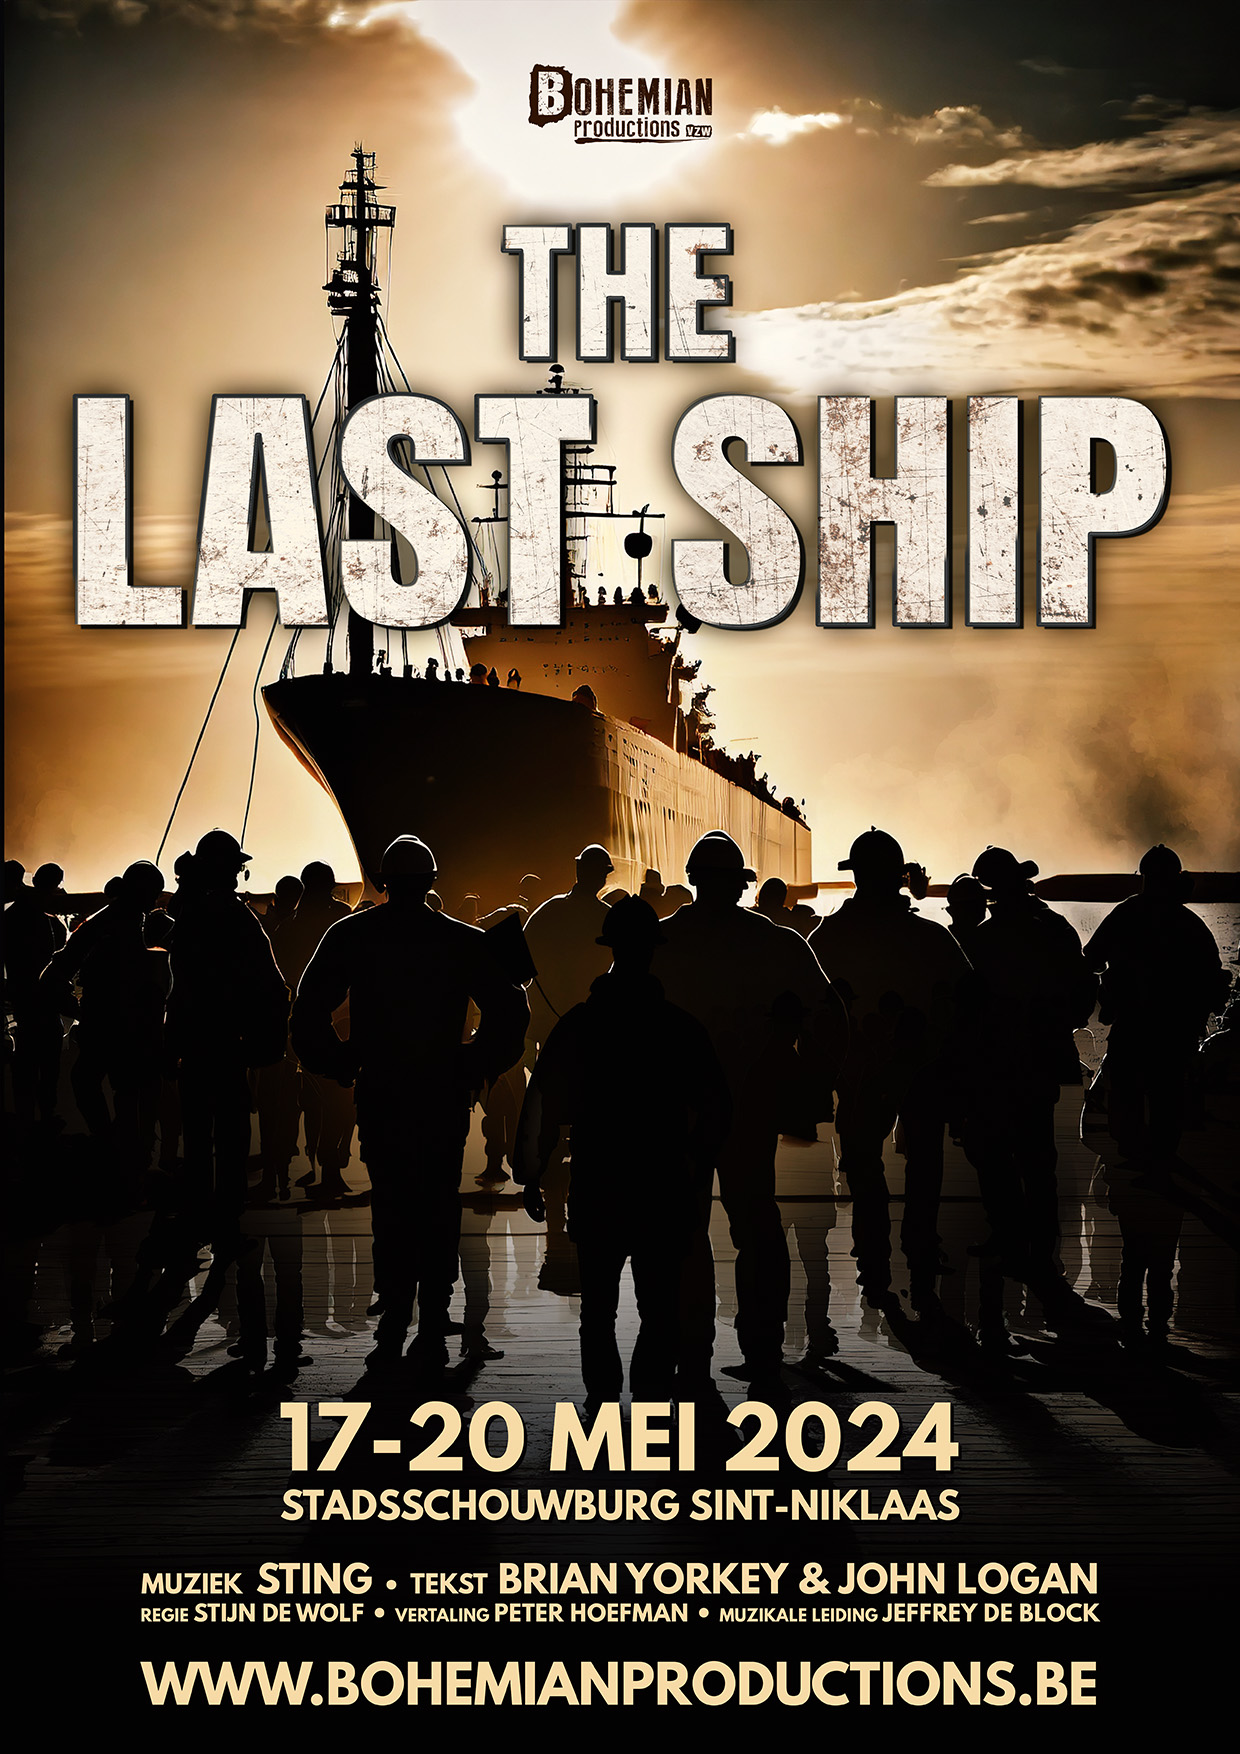 The last ship musical Bohemian Productions